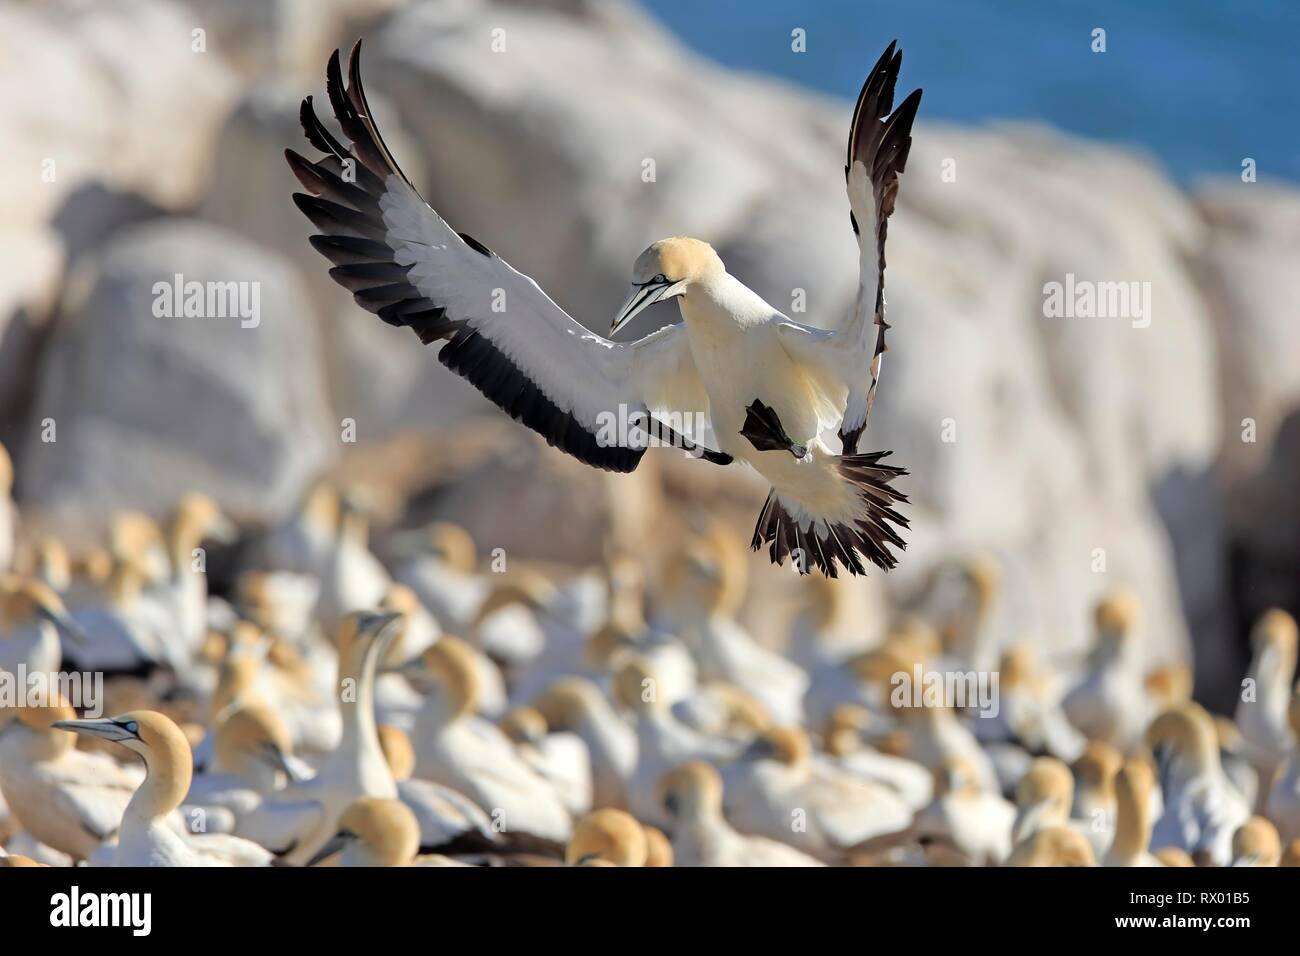 Cape Gannet (Morus capensis), adult flying, approach over bird colony, Lamberts Bay, Western Cape, South Africa Stock Photo